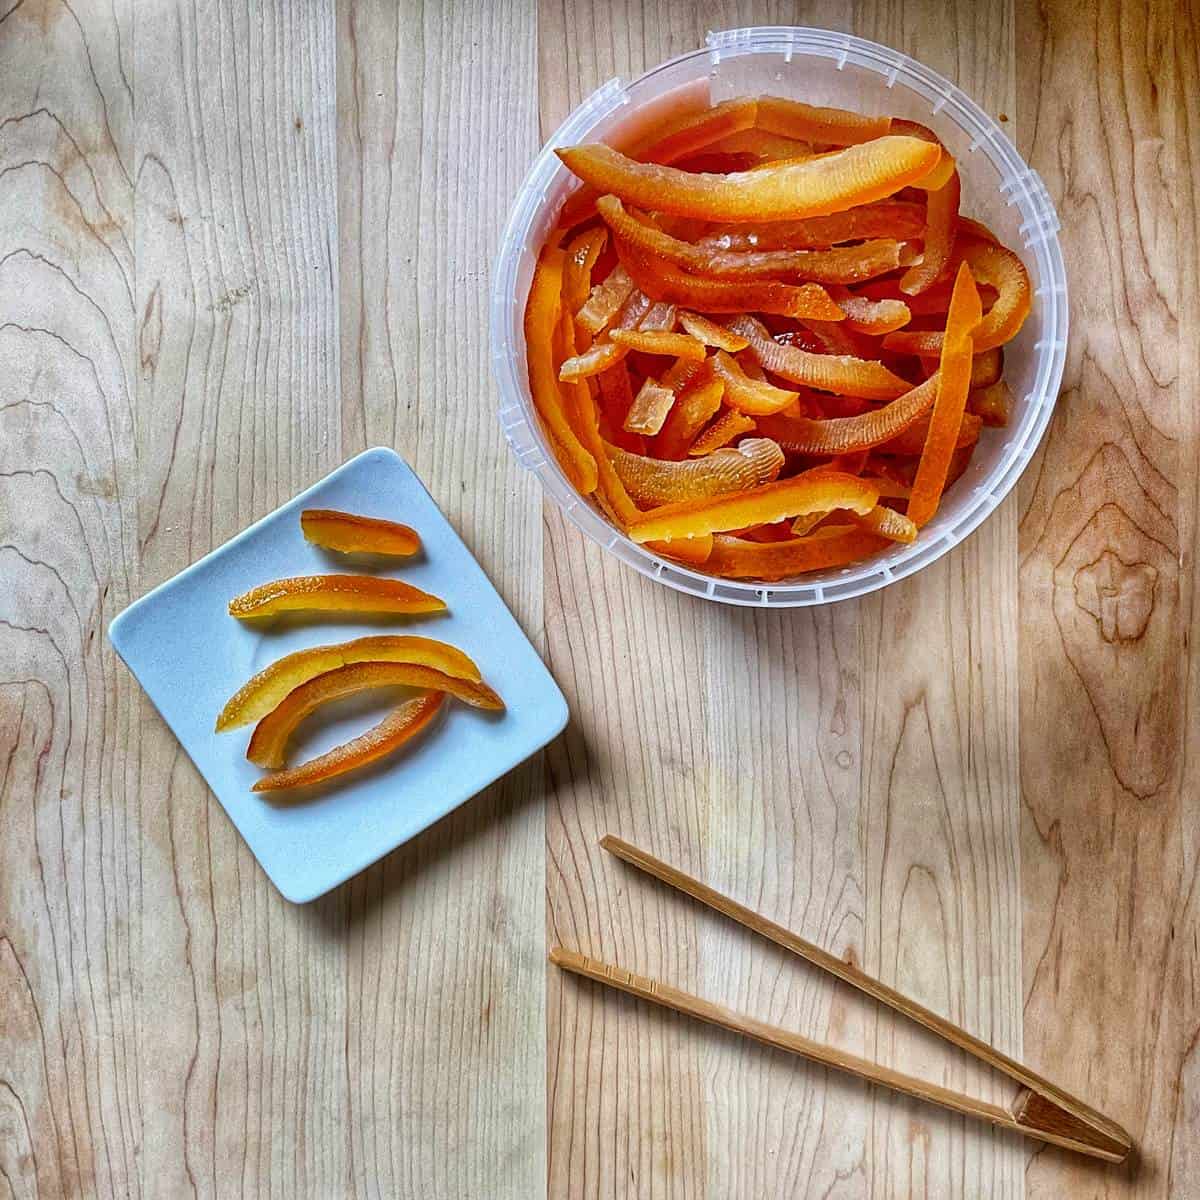 Candied orange peel on a wooden surface.